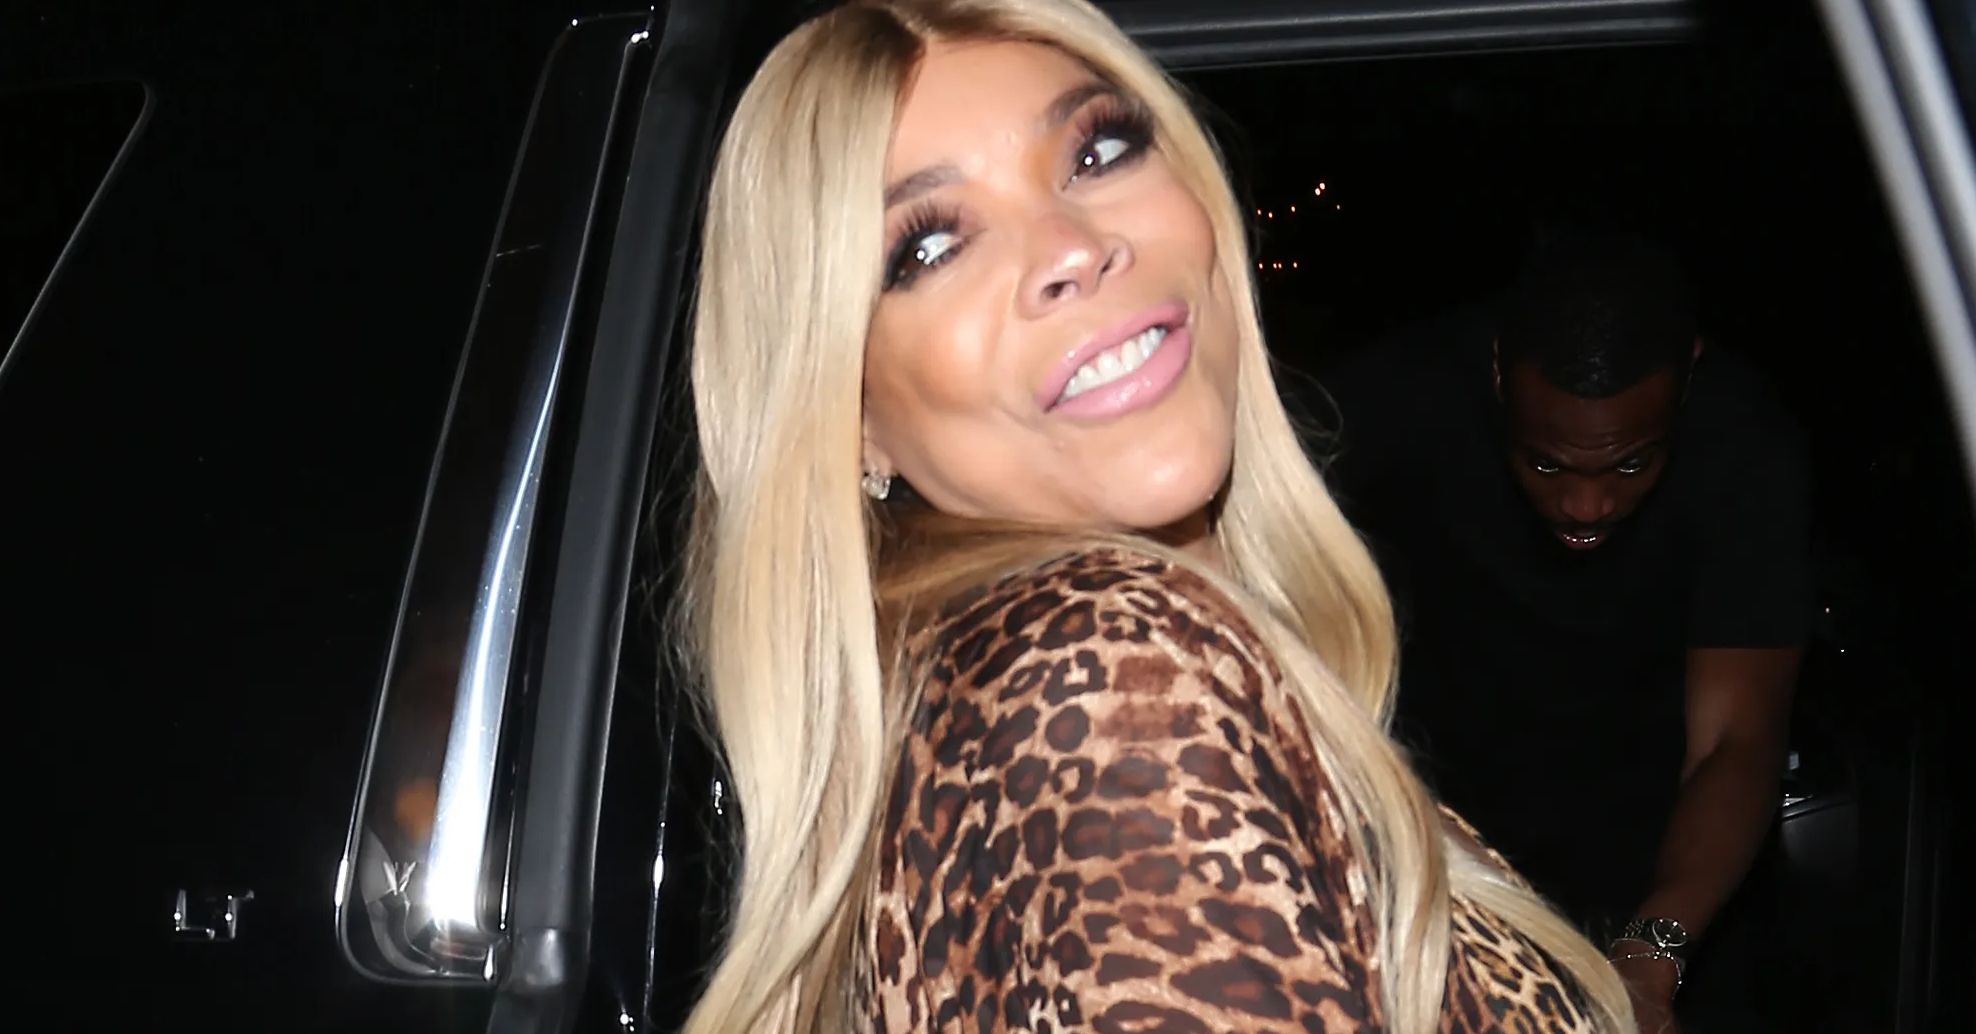 Wendy Williams Blows Away Fans With Huge BURP On Television Show!